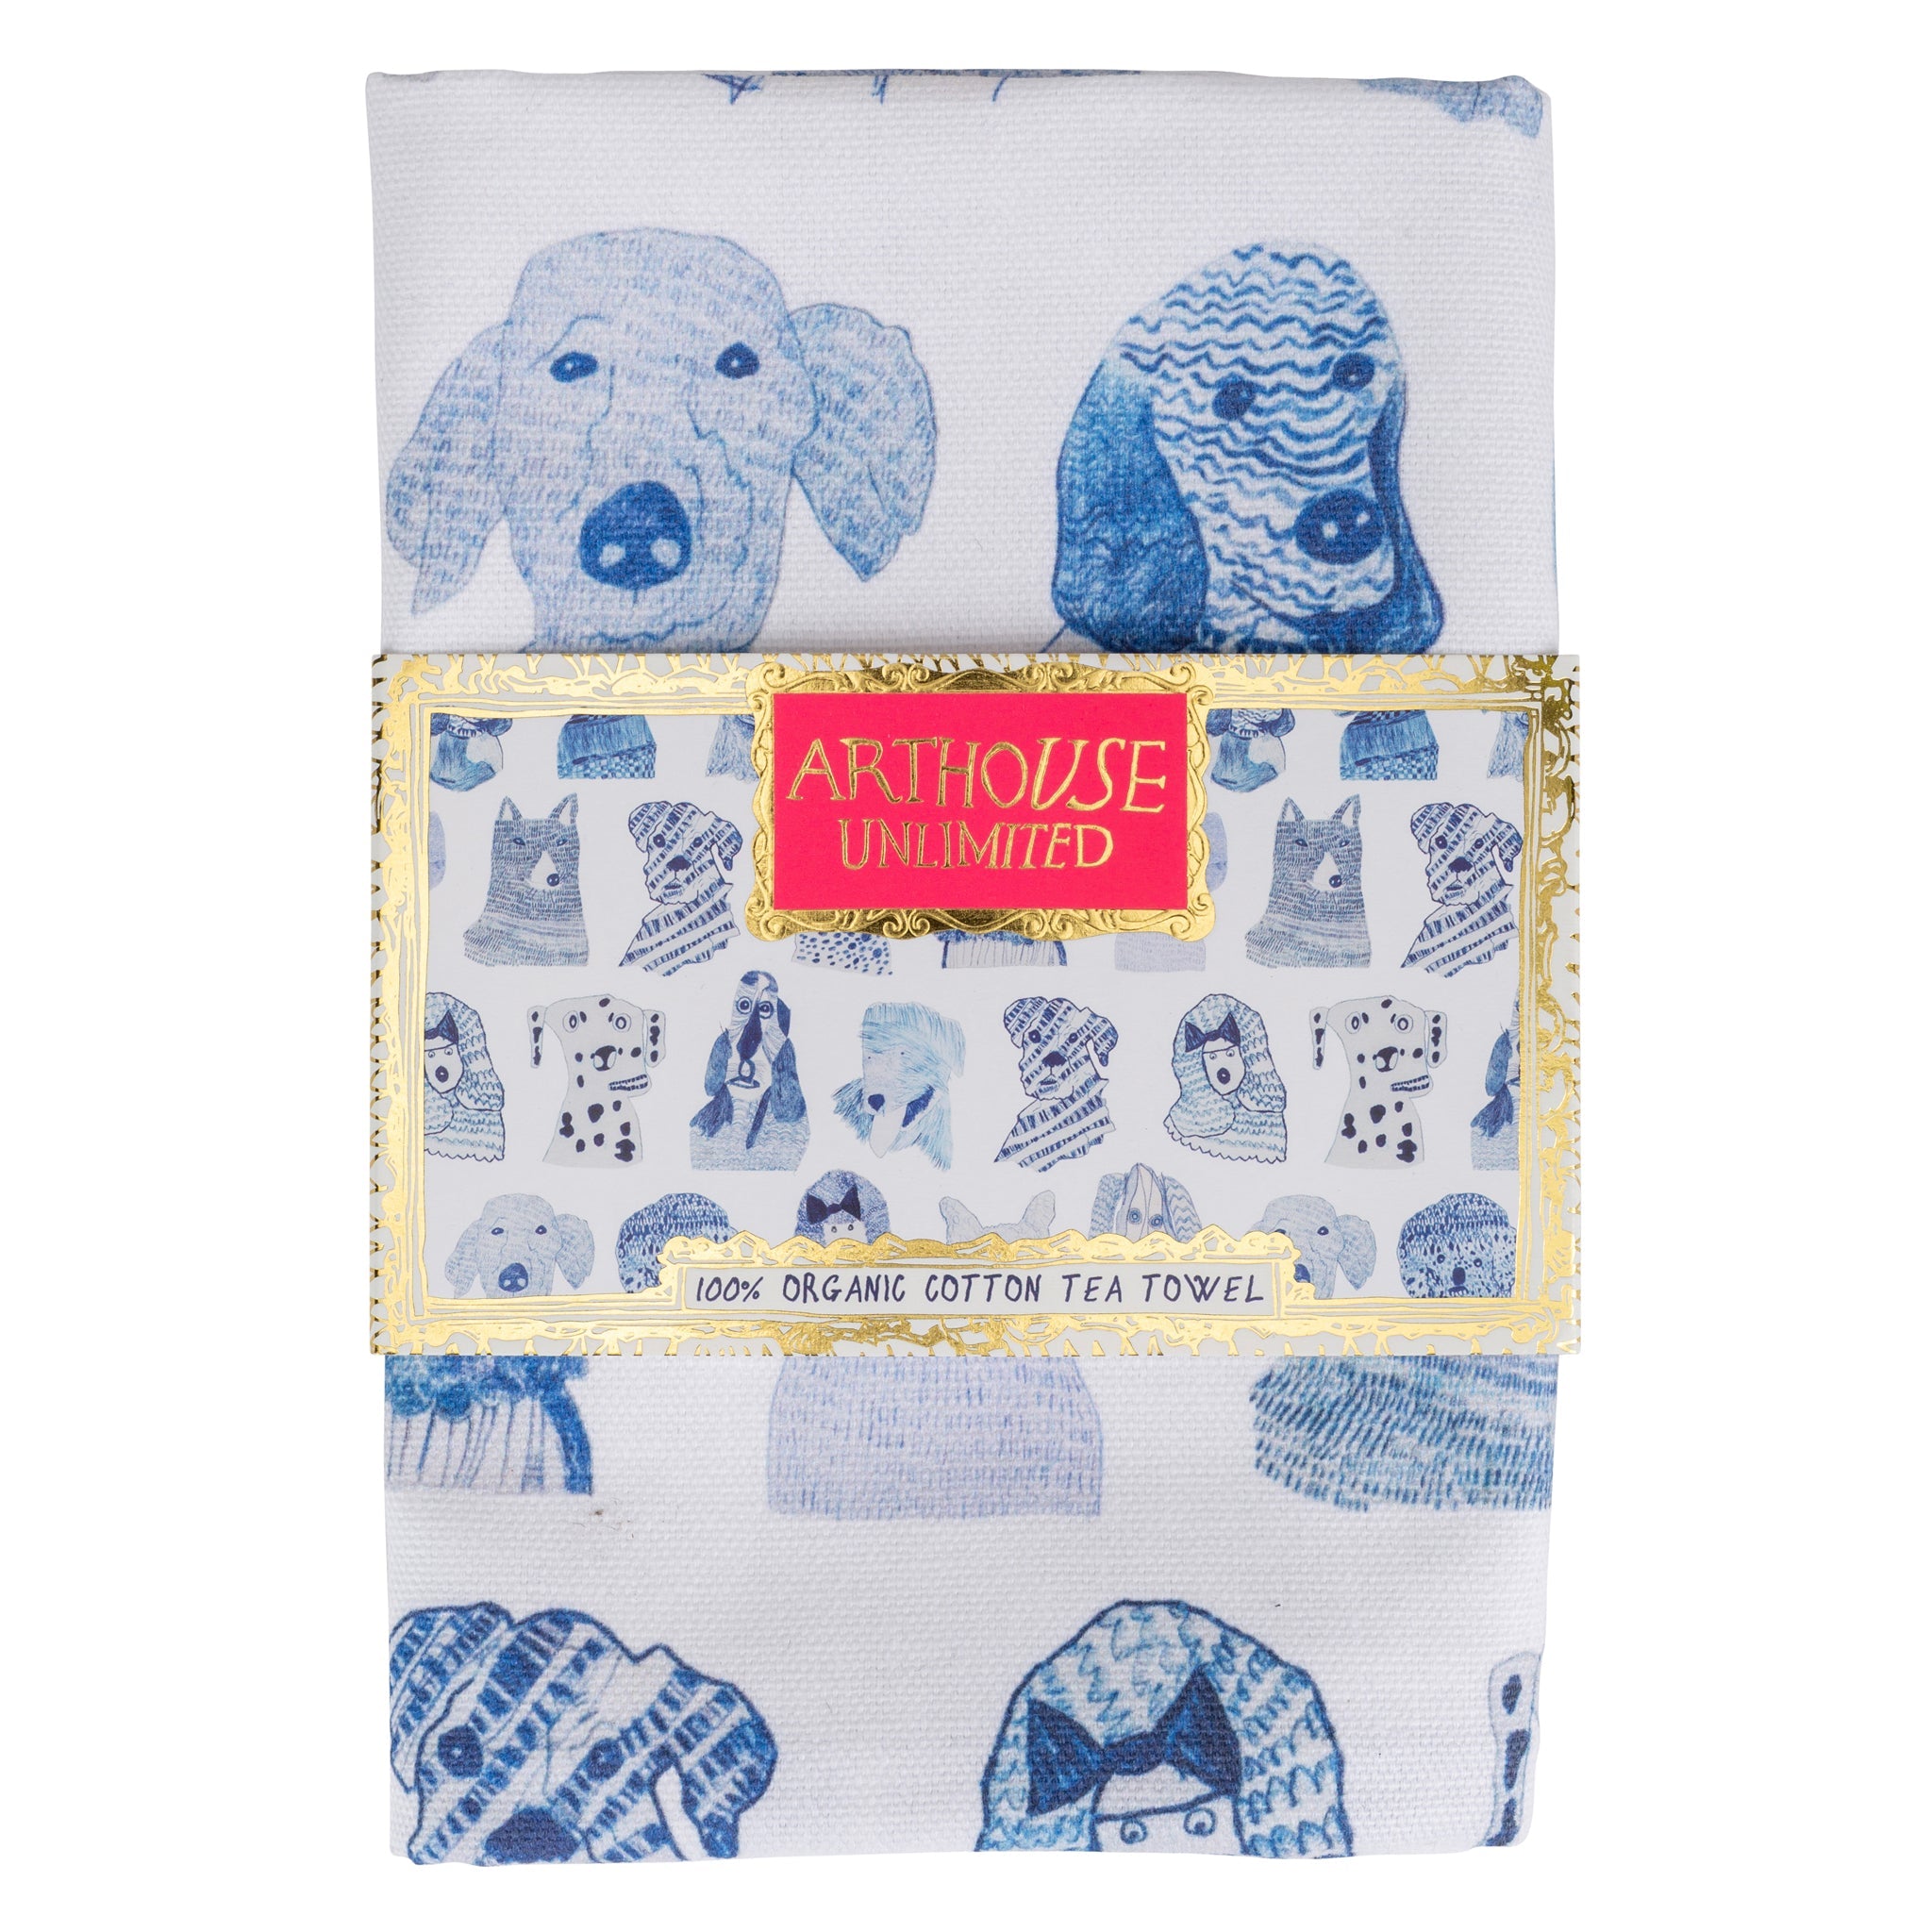 Blue and white Blue Dogs, 100% Organic Tea Towel with arthouse unlimited belly band 